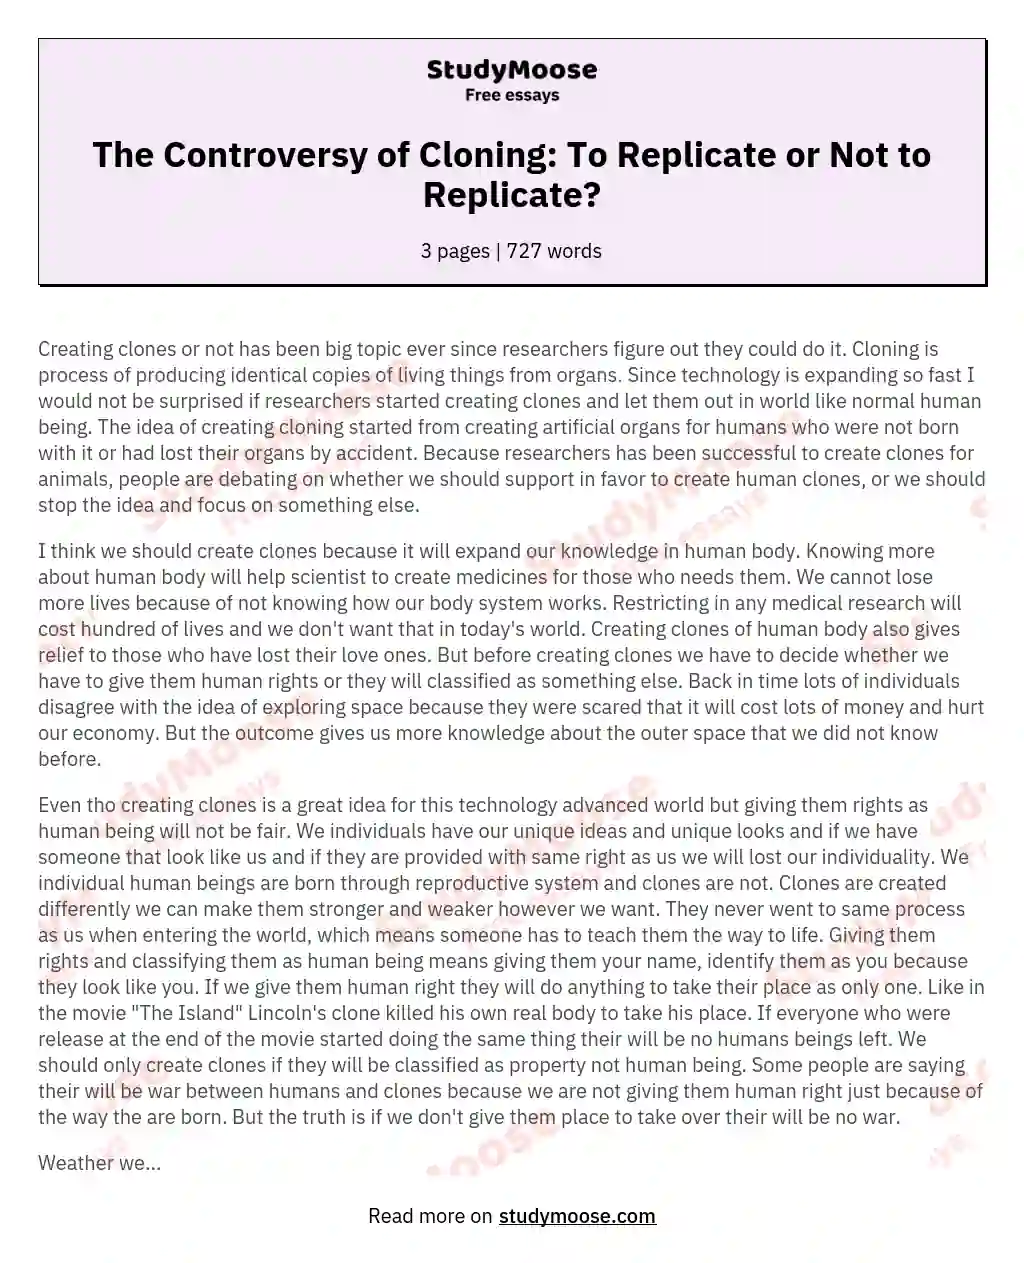 The Controversy of Cloning: To Replicate or Not to Replicate? essay